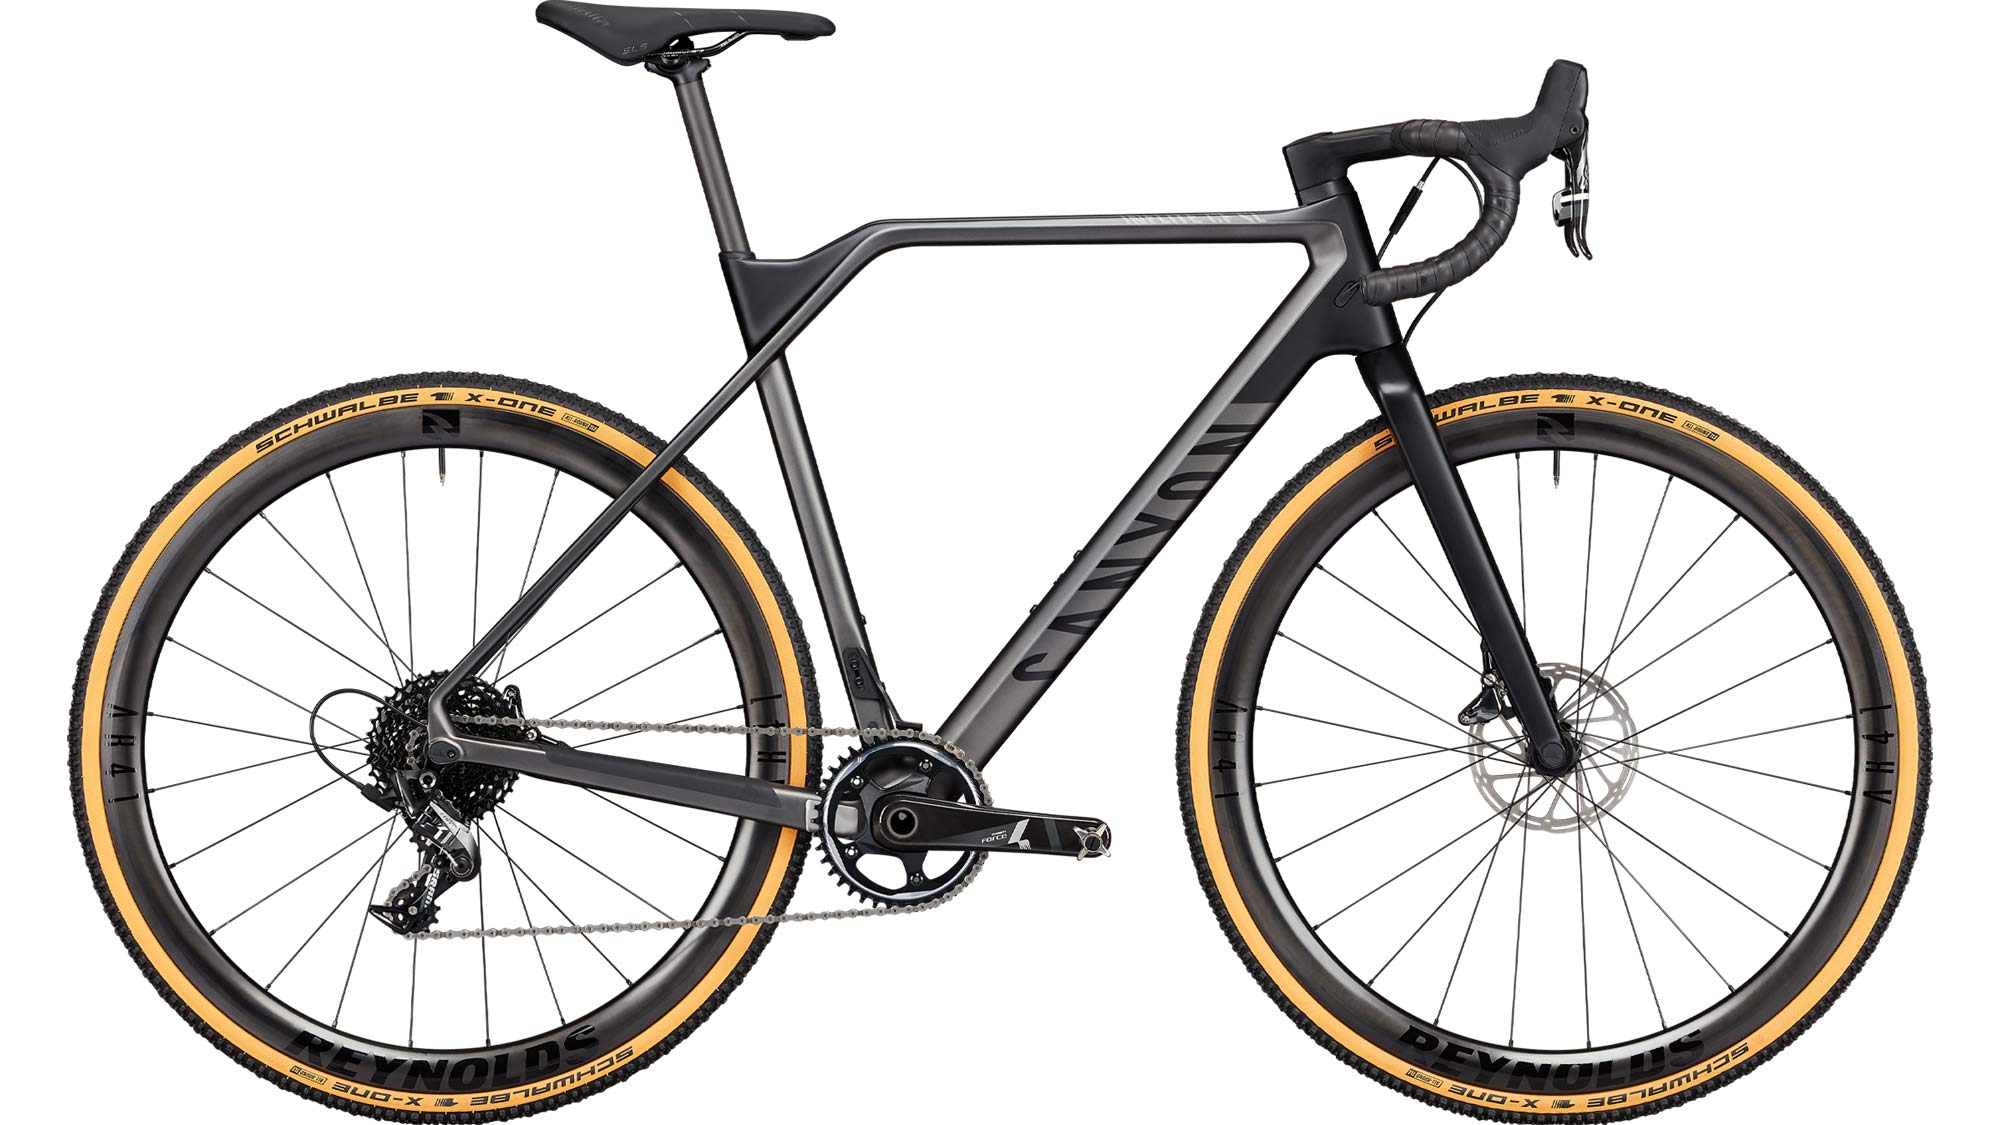 2021 Canyon Inflite carbon or aluminum alloy cyclocross bikes, affordable race-ready cross bikes of elite World Champions